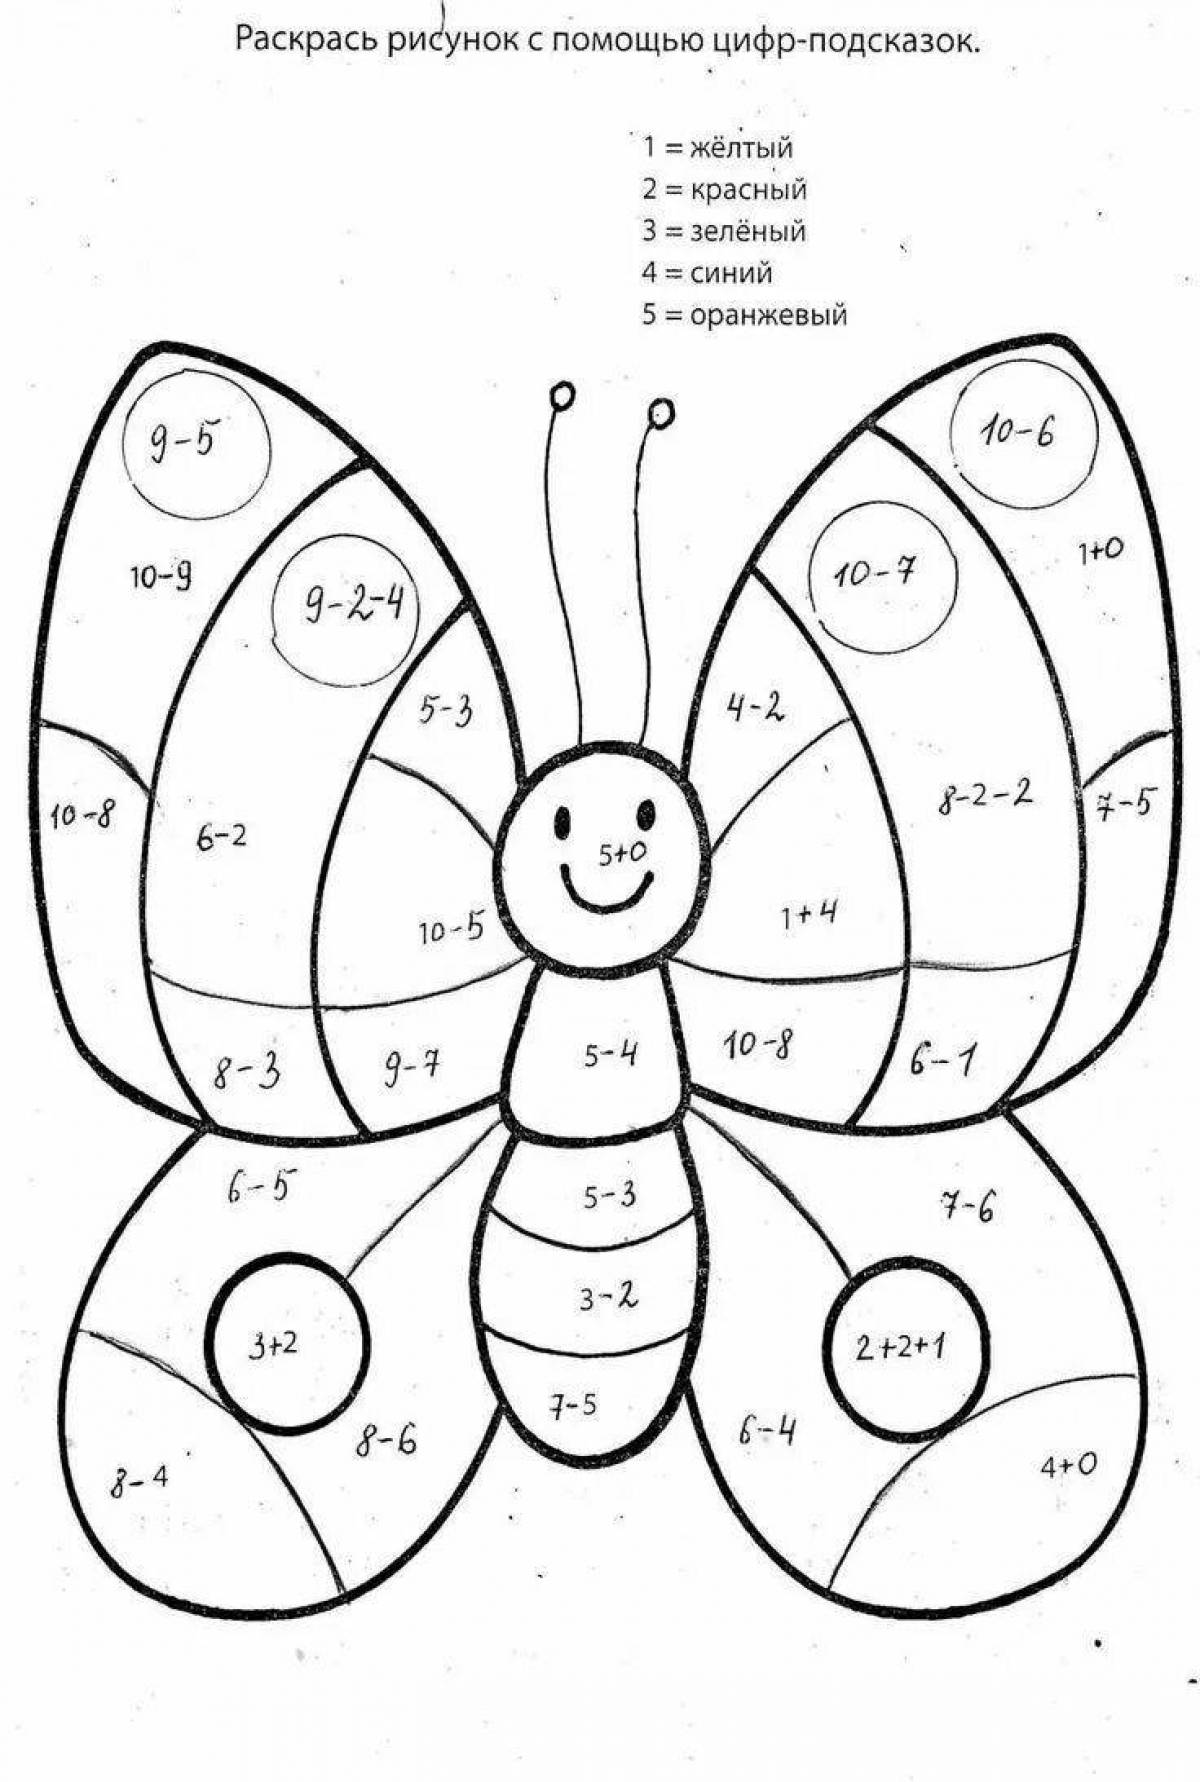 Fun math coloring book for kids 5-6 years old